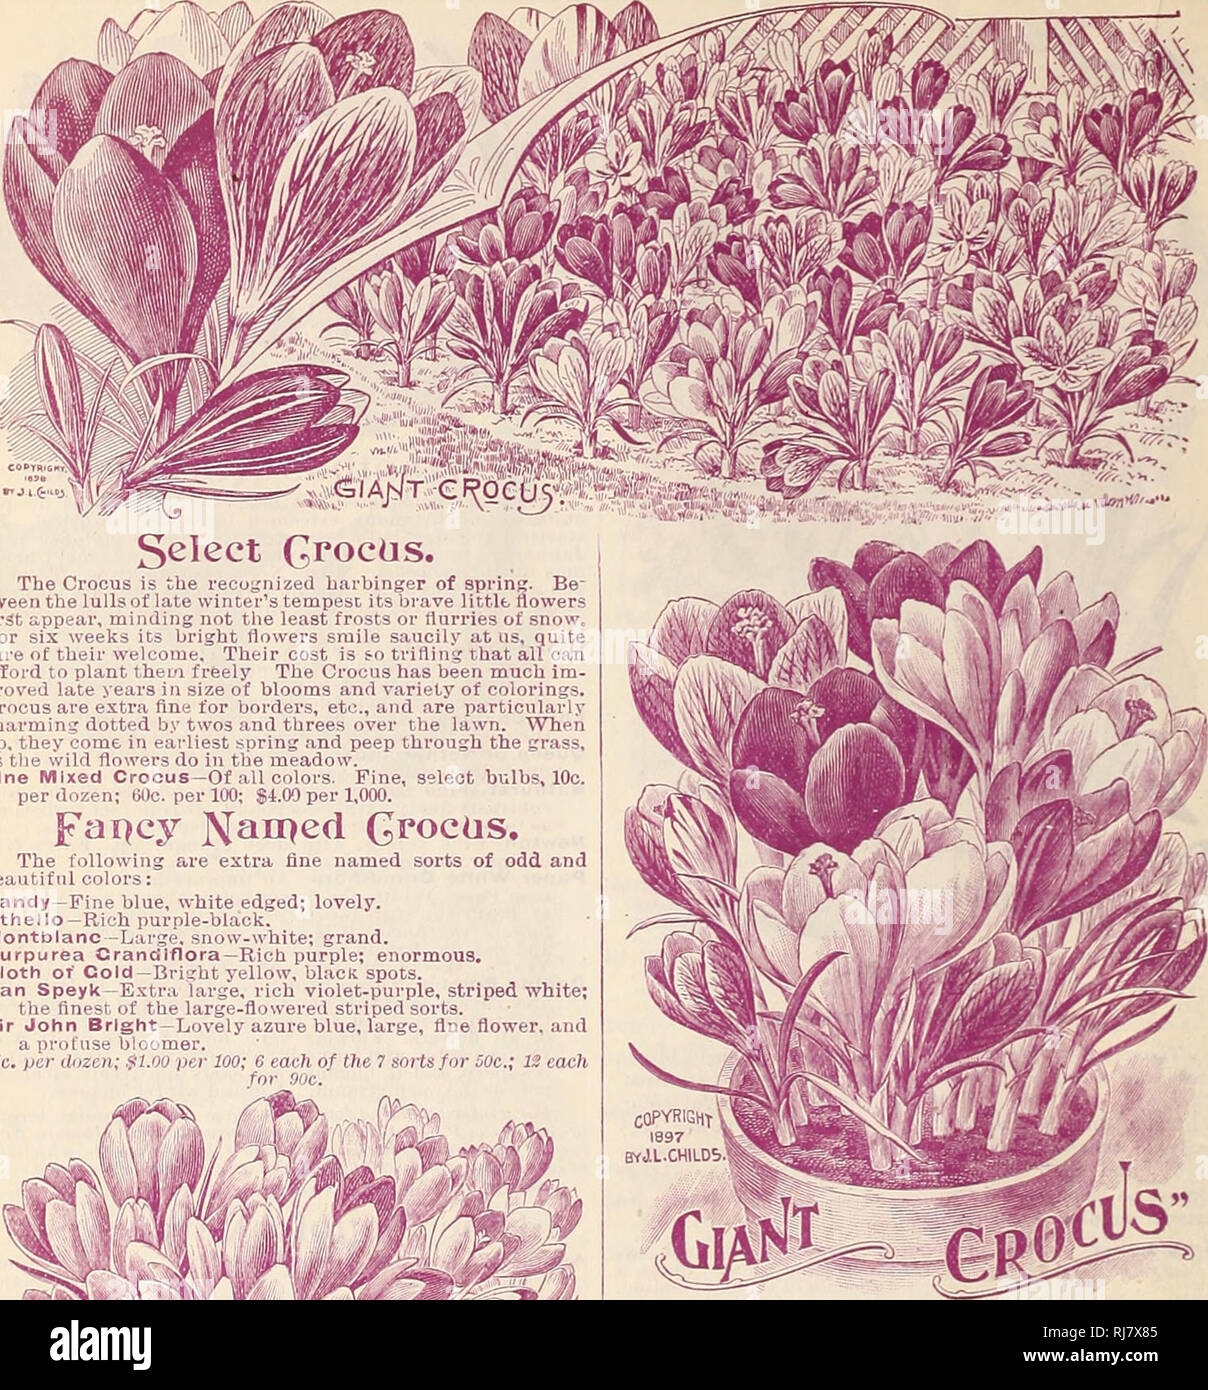 . Childs' fall catalogue of bulbs that bloom, 1899. Nurseries (Horticulture) Catalogs; Bulbs (Plants) Catalogs; John Lewis Childs (Firm); Nurseries (Horticulture); Bulbs (Plants). 14 JOHN LEWIS CHILDS, FLORAL PARK, N. Y.. Select Crocks. The Crocus is the recognized harbinger of spring. Be- tween the lulls of late winter's tempest its brave little flowers first appear, minding not the least frosts or flurries of snow. For six weeks its bright flowers smile saucily at us, quite sure of their welcome. Their cost is so trifling that all can afford to plant them freely The Crocus has been much im-  Stock Photo